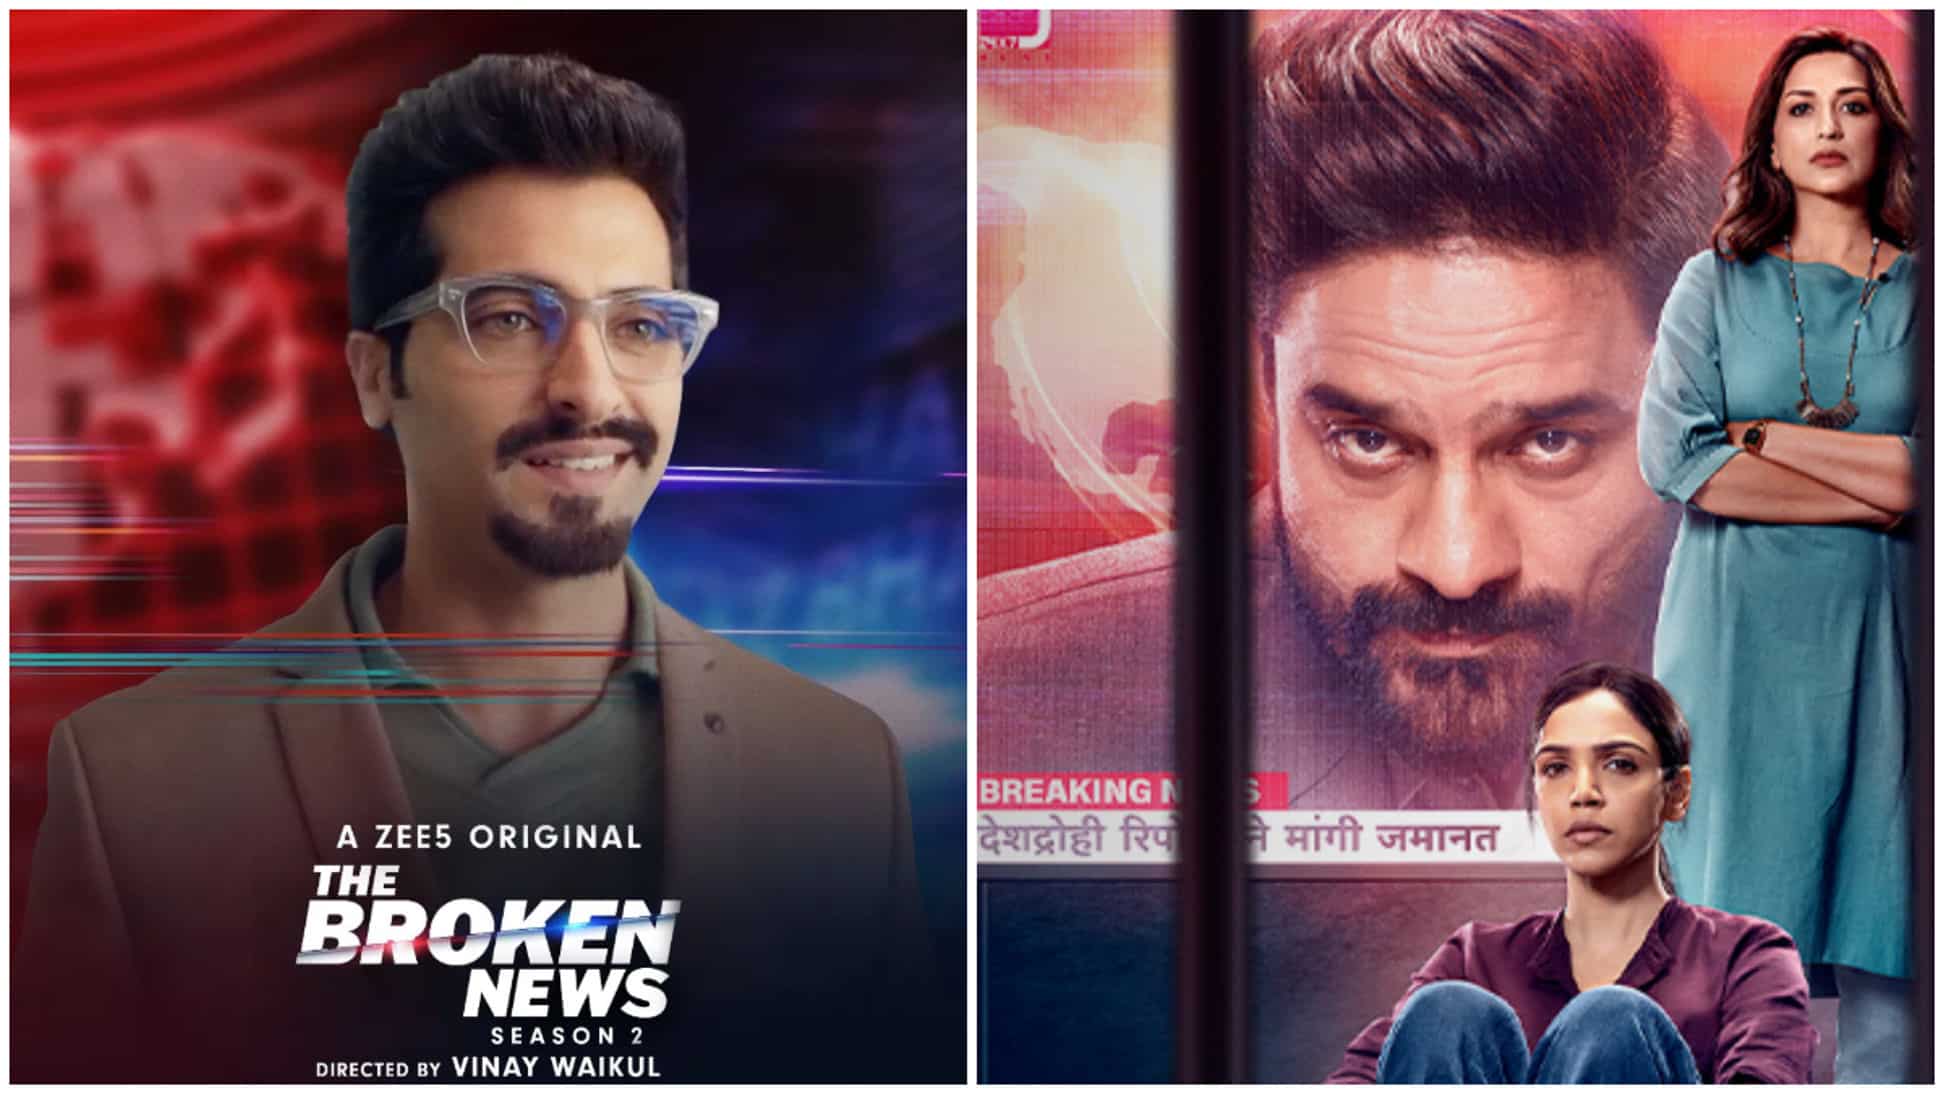 https://www.mobilemasala.com/movies/Zee5s-The-Broken-News-actor-Akshay-Oberoi-shares-his-perspective-I-am-an-outsider-OTT-brought-me-in-i260769